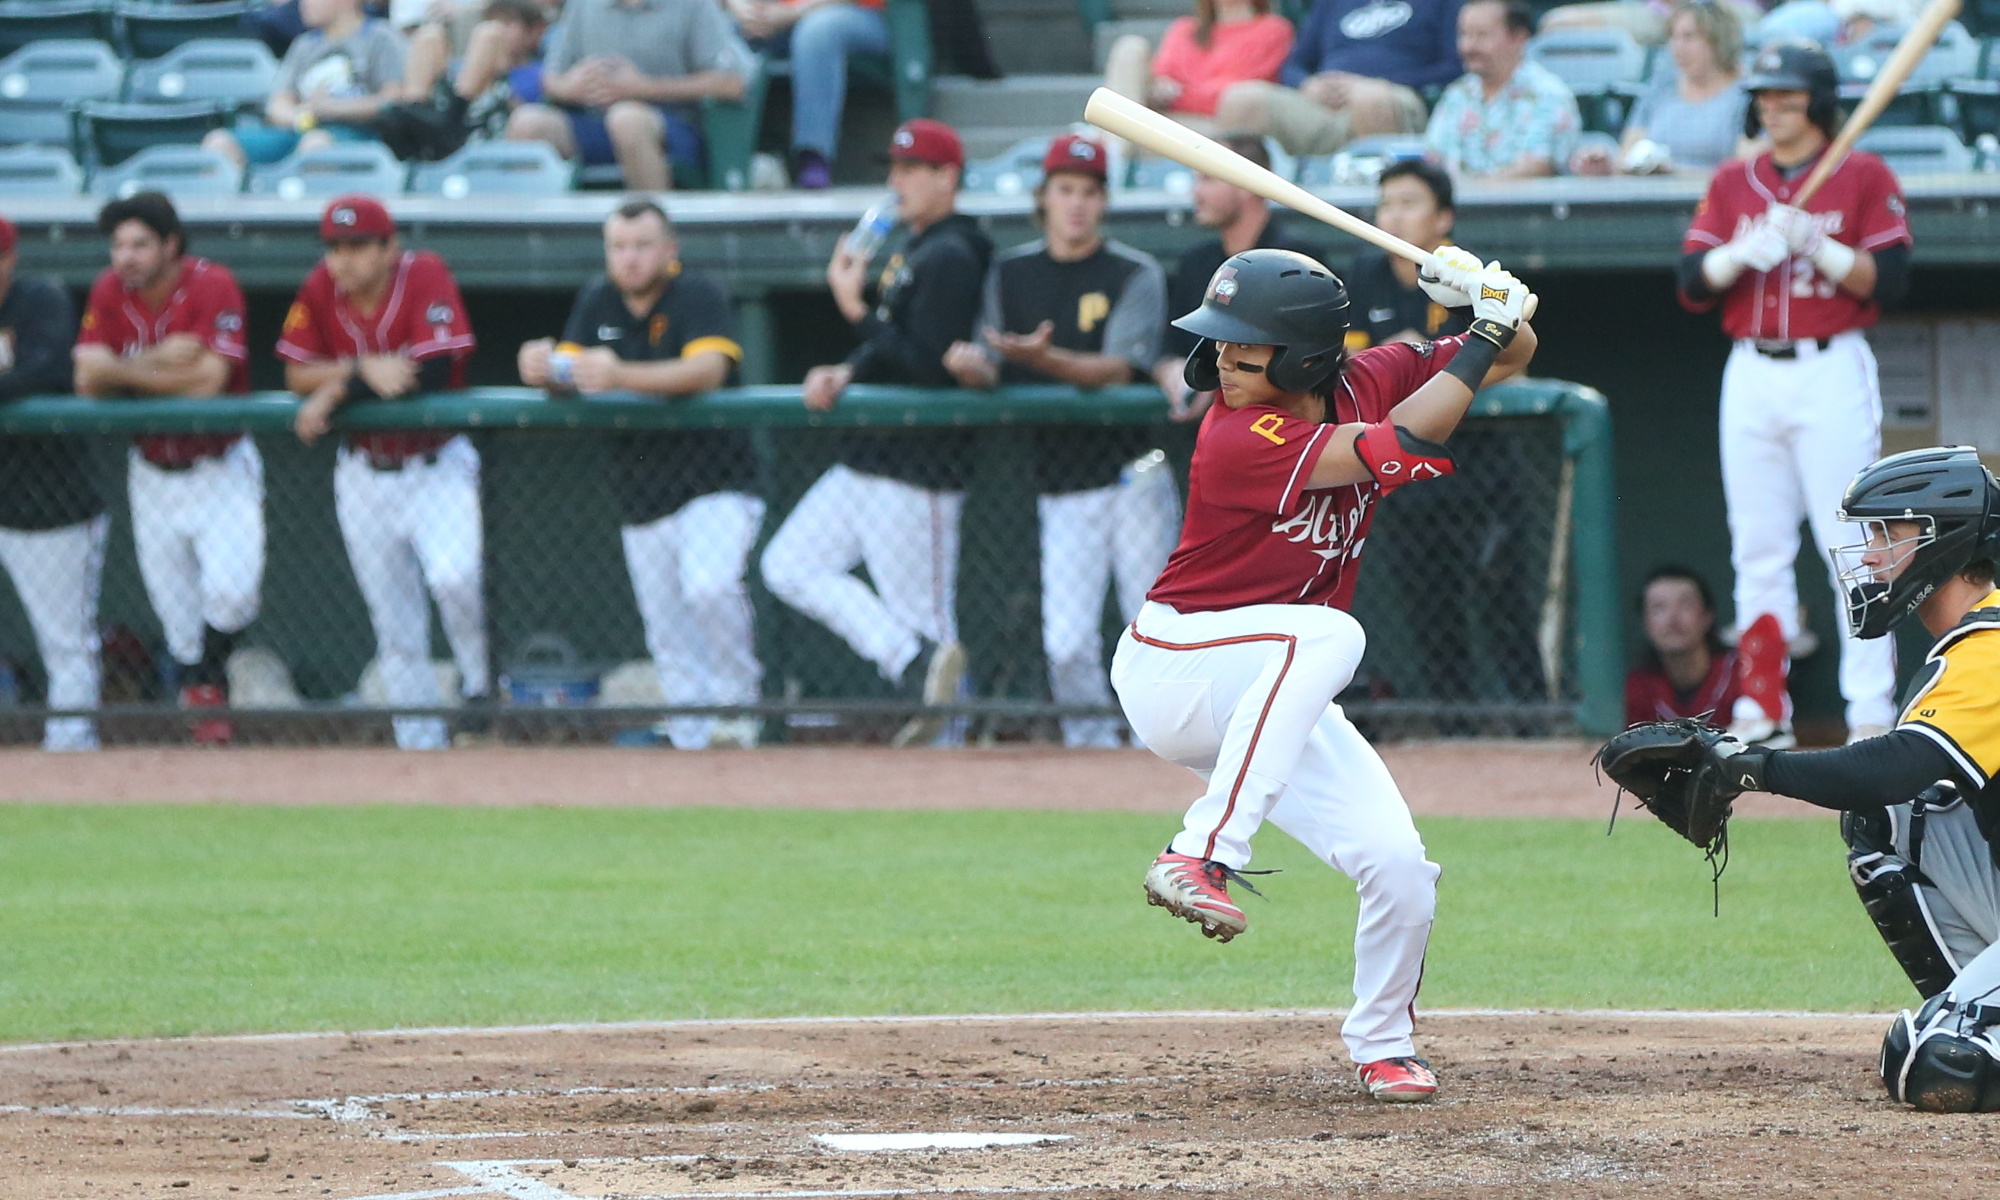 AFL Recap: Quiet Night on Offense for the Pirates Prospect in a Peoria Loss